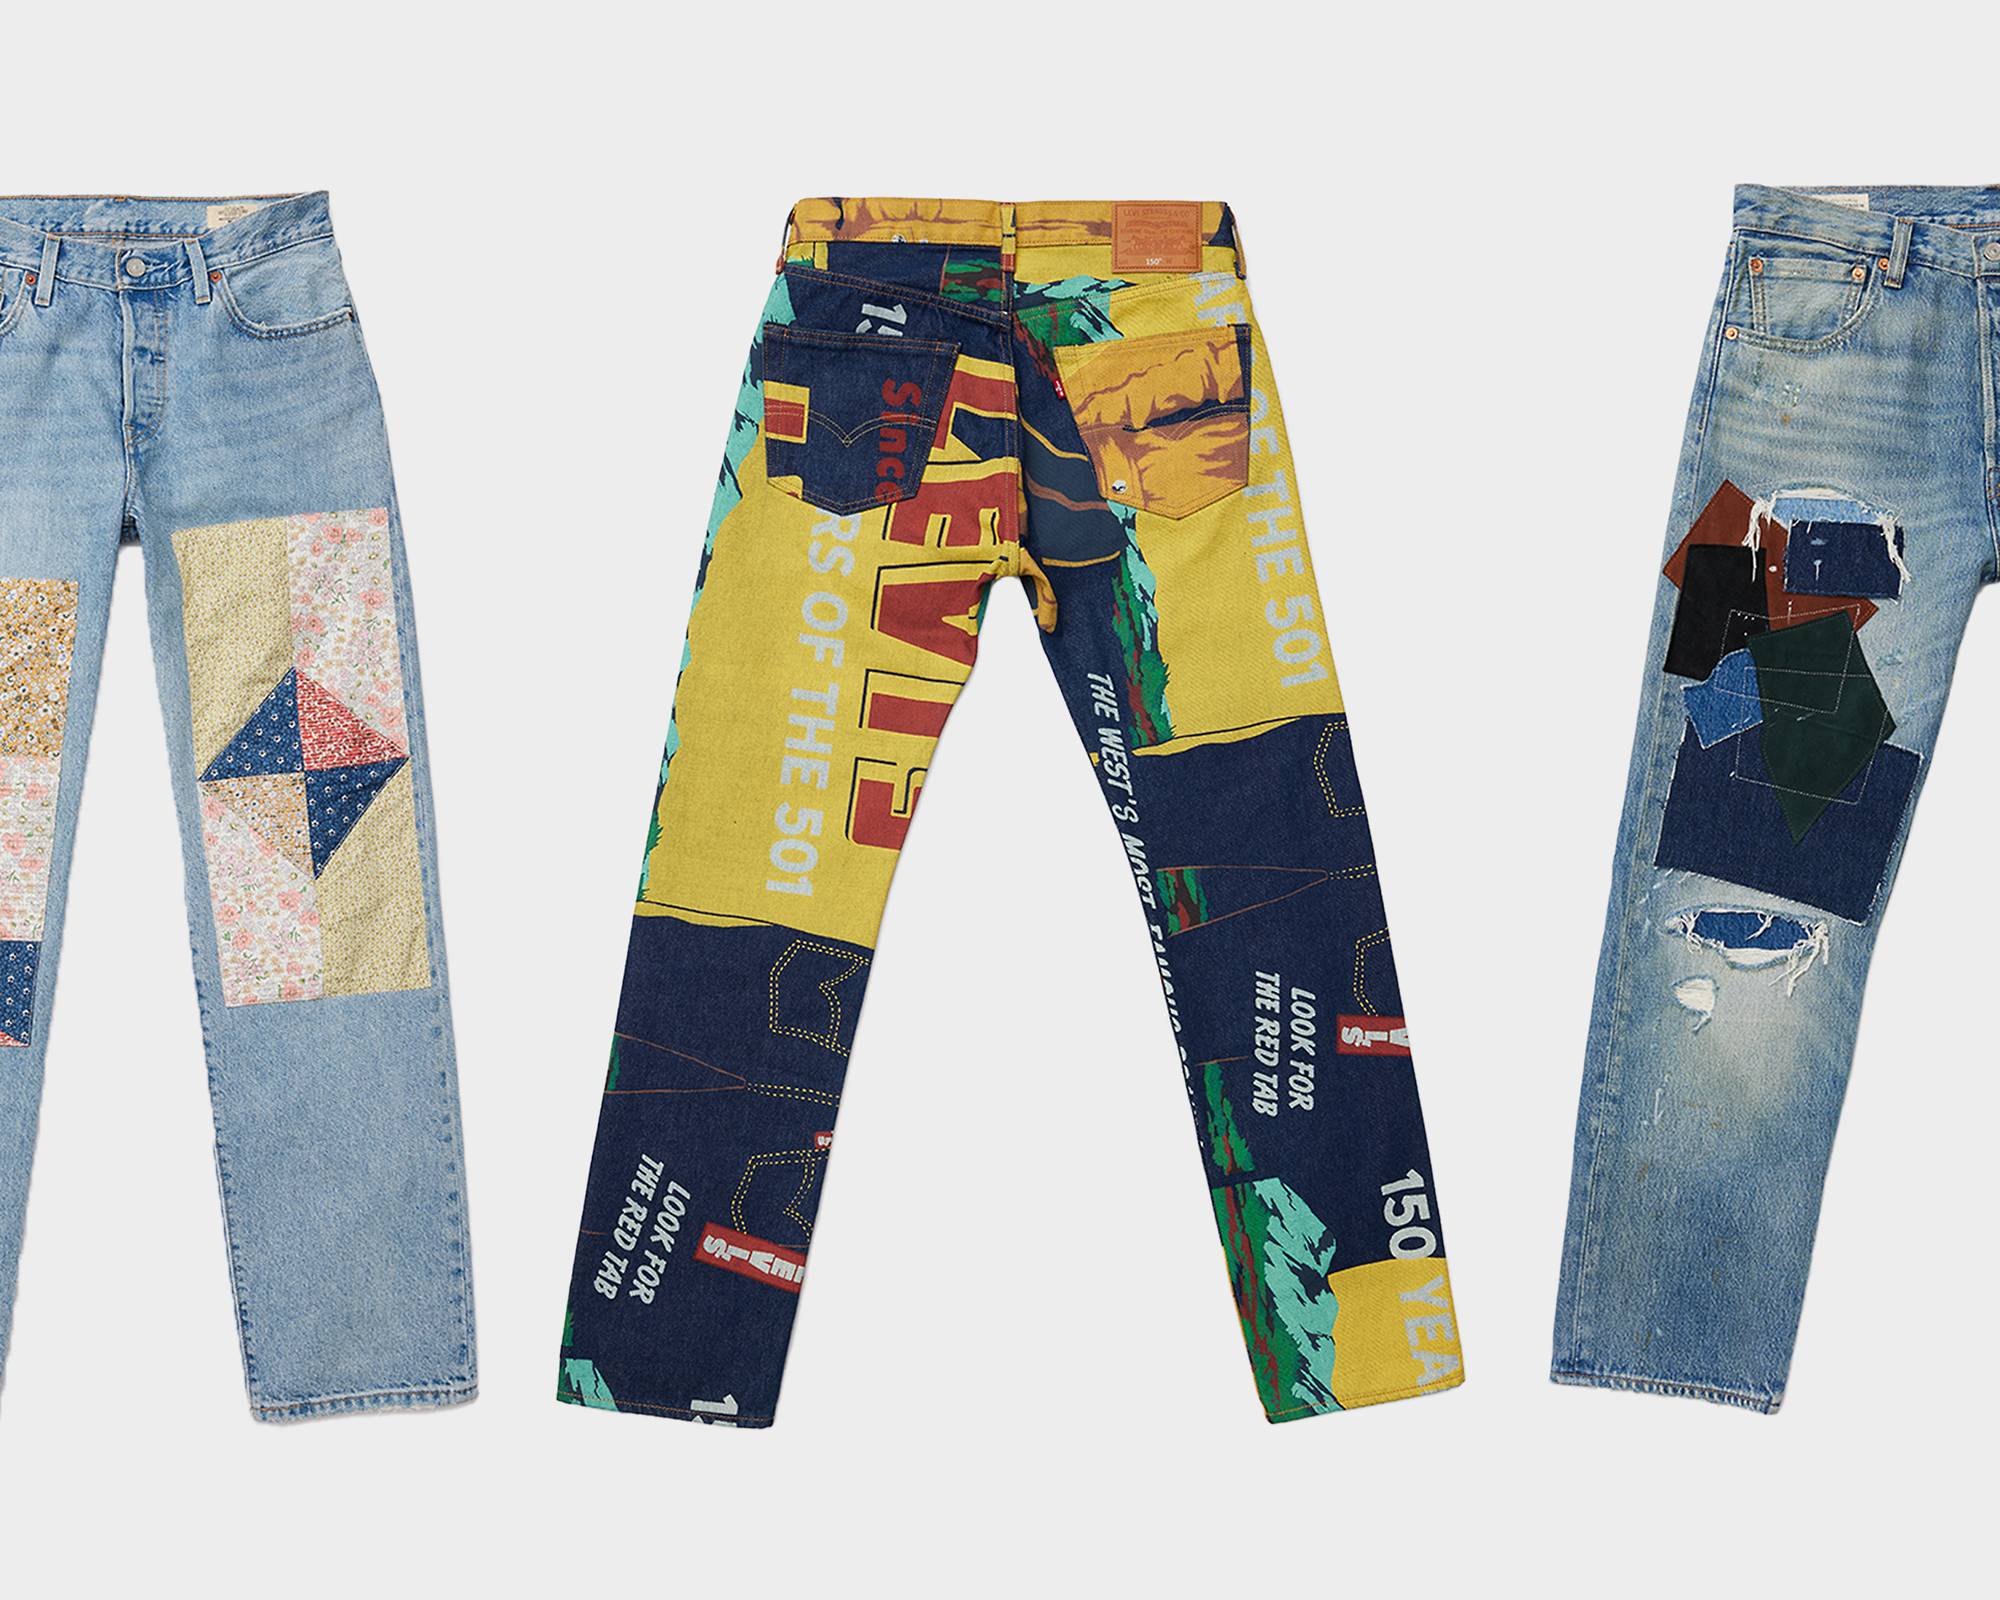 Three customized 501 jeans on a white background.